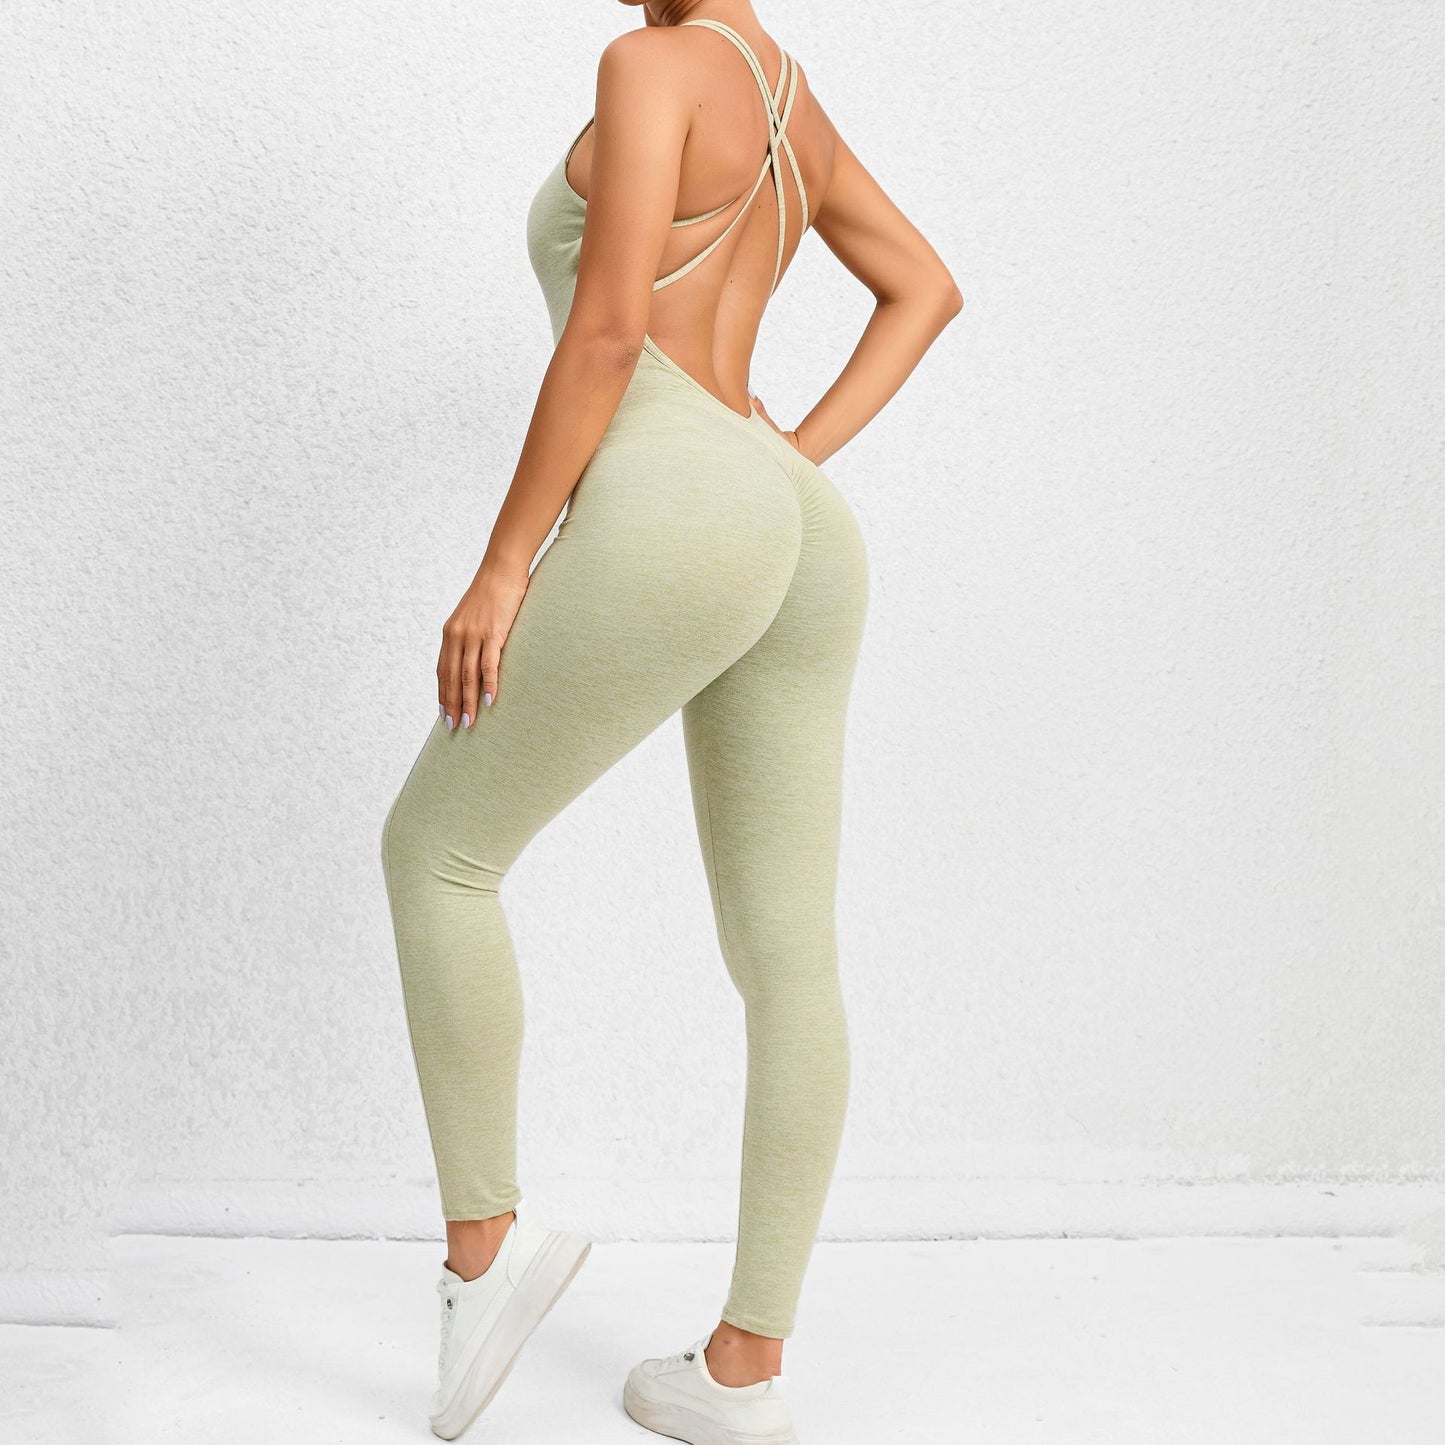 Yoga Jumpsuit With Cross-strap Back Design Quick-drying Tight-fitting Running Sports Fitness Pants Fashion Seamless Leggings For Womens Clothing